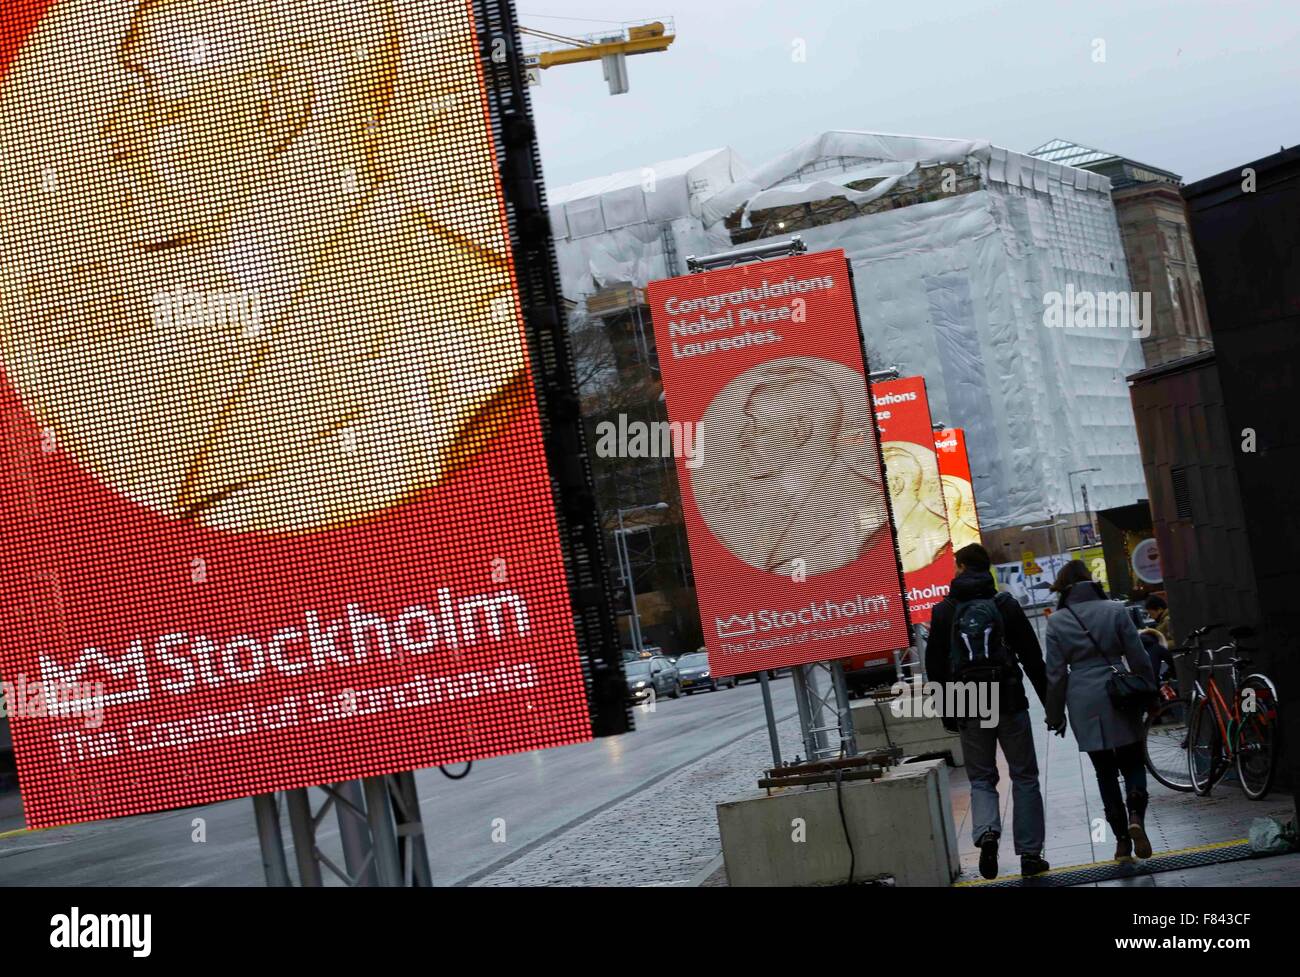 Stockholm, Dec. 5. 10th Dec, 2015. Pedestrians walk past screens with image of Nobel Prize medal in downtown Stockholm, capital of Sweden, Dec. 5, 2015. The 2015 Nobel Prize awarding ceremony will be held here on Dec. 10, 2015. © Ye Pingfan/Xinhua/Alamy Live News Stock Photo